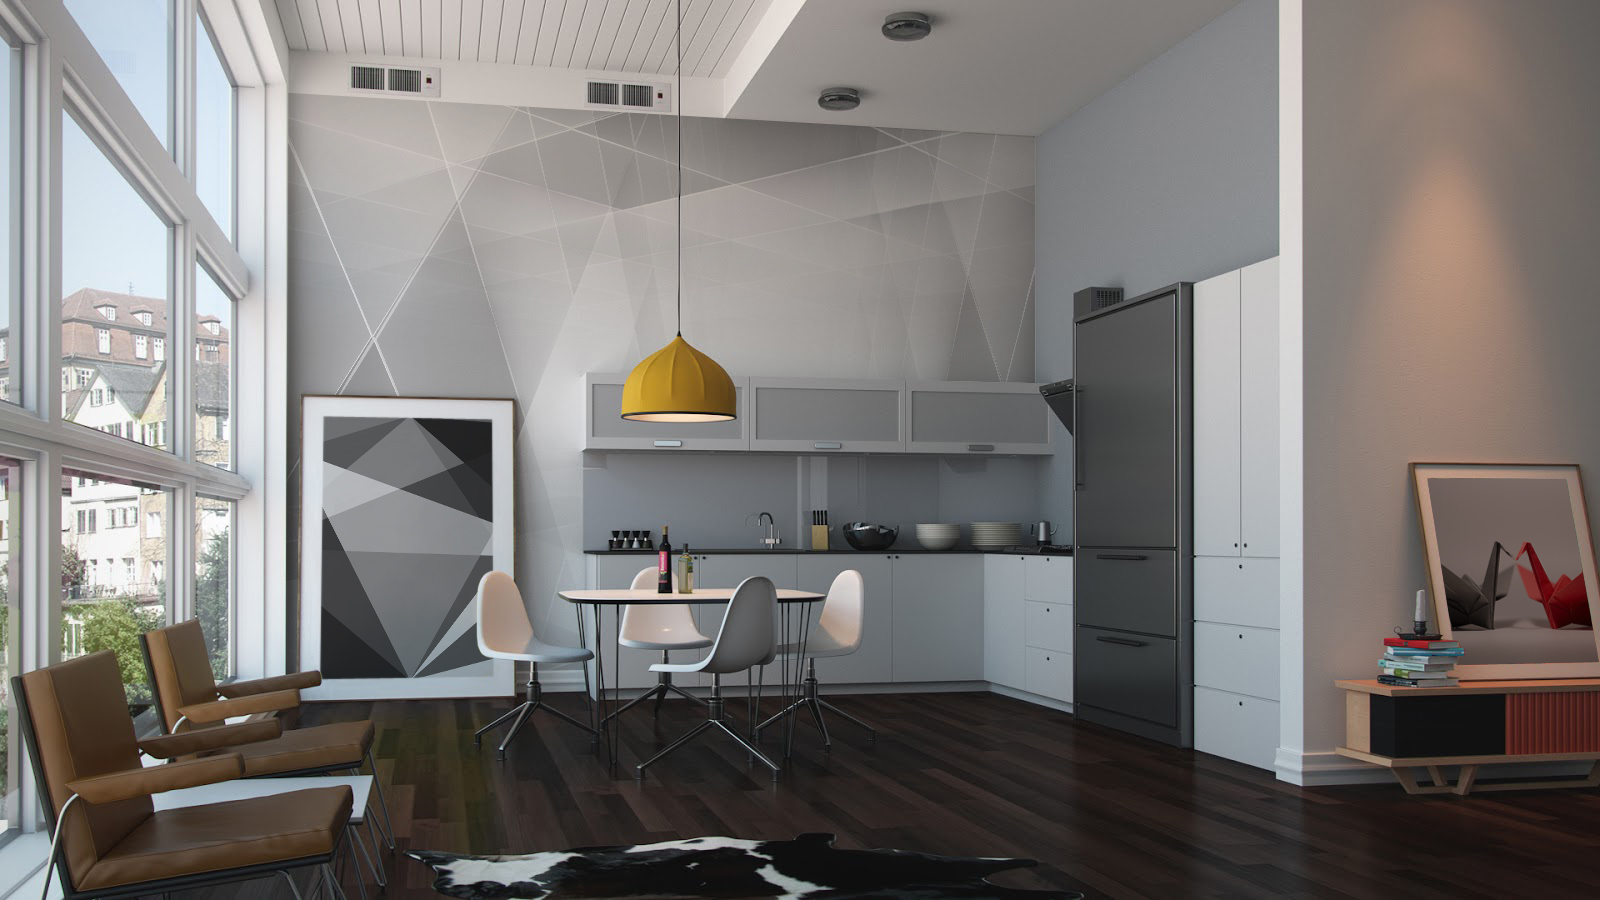 Origami • Kitchen - Contemporary - Abstraction - Wall Murals - Posters